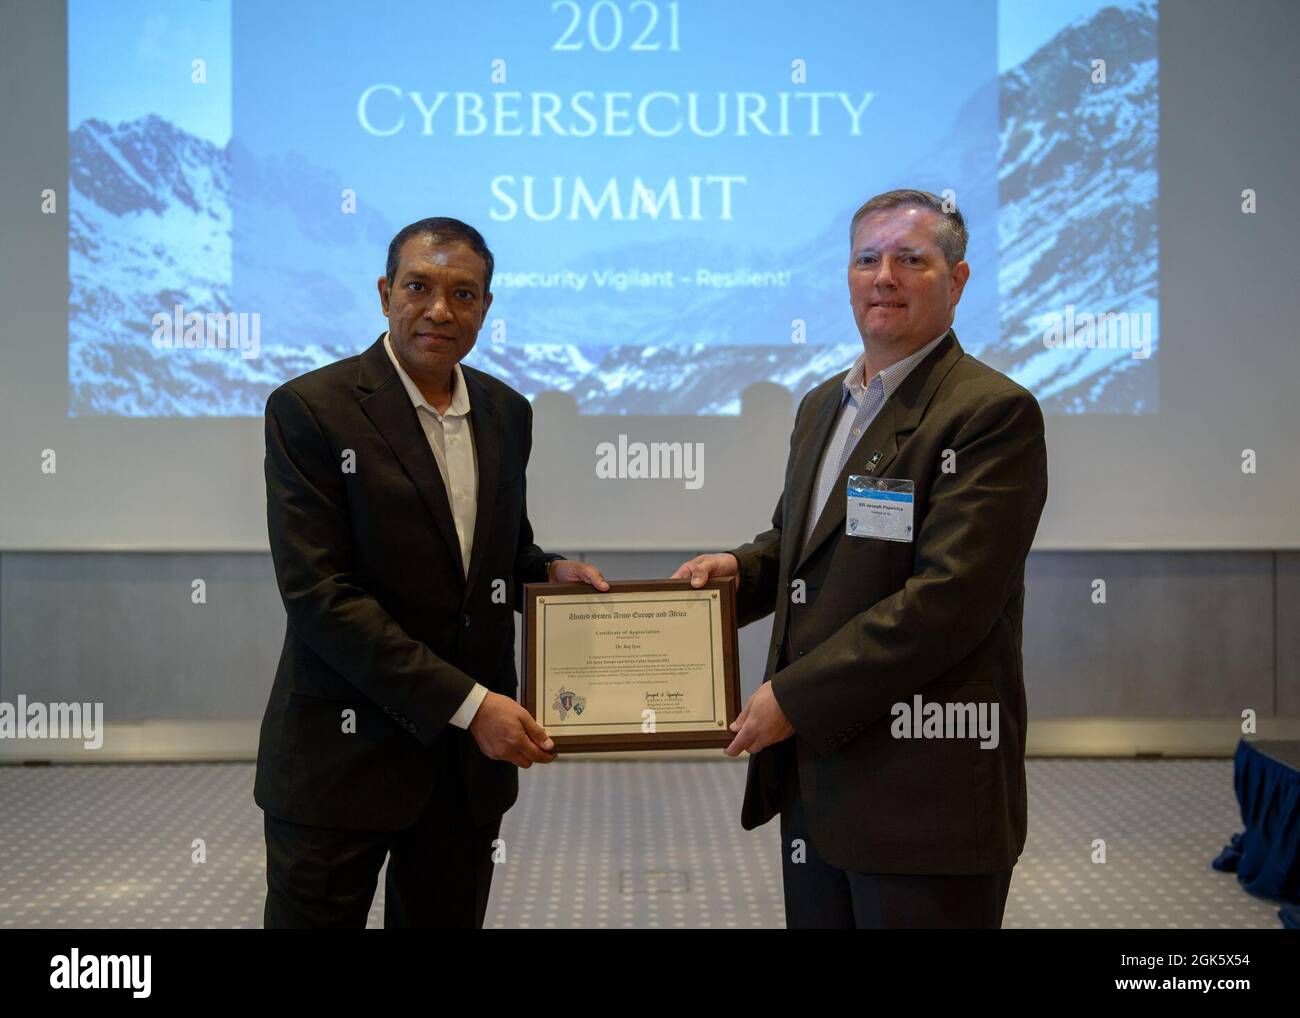 U.S. Army Brig. Gen. Joseph A. Papenfus, Deputy Chief of Staff G6, U.S. Army Europe and Africa (right), presents an award to Dr. Raj Iyer, Army Chief Information Officer, U.S. Department of the Army, during the 2021 cybersecurity summit in Wiesbaden, Germany, Aug. 10-12, 2021. Topics and discussions ranged from covering innovations and challenges to securing cyber terrain objectives. Stock Photo